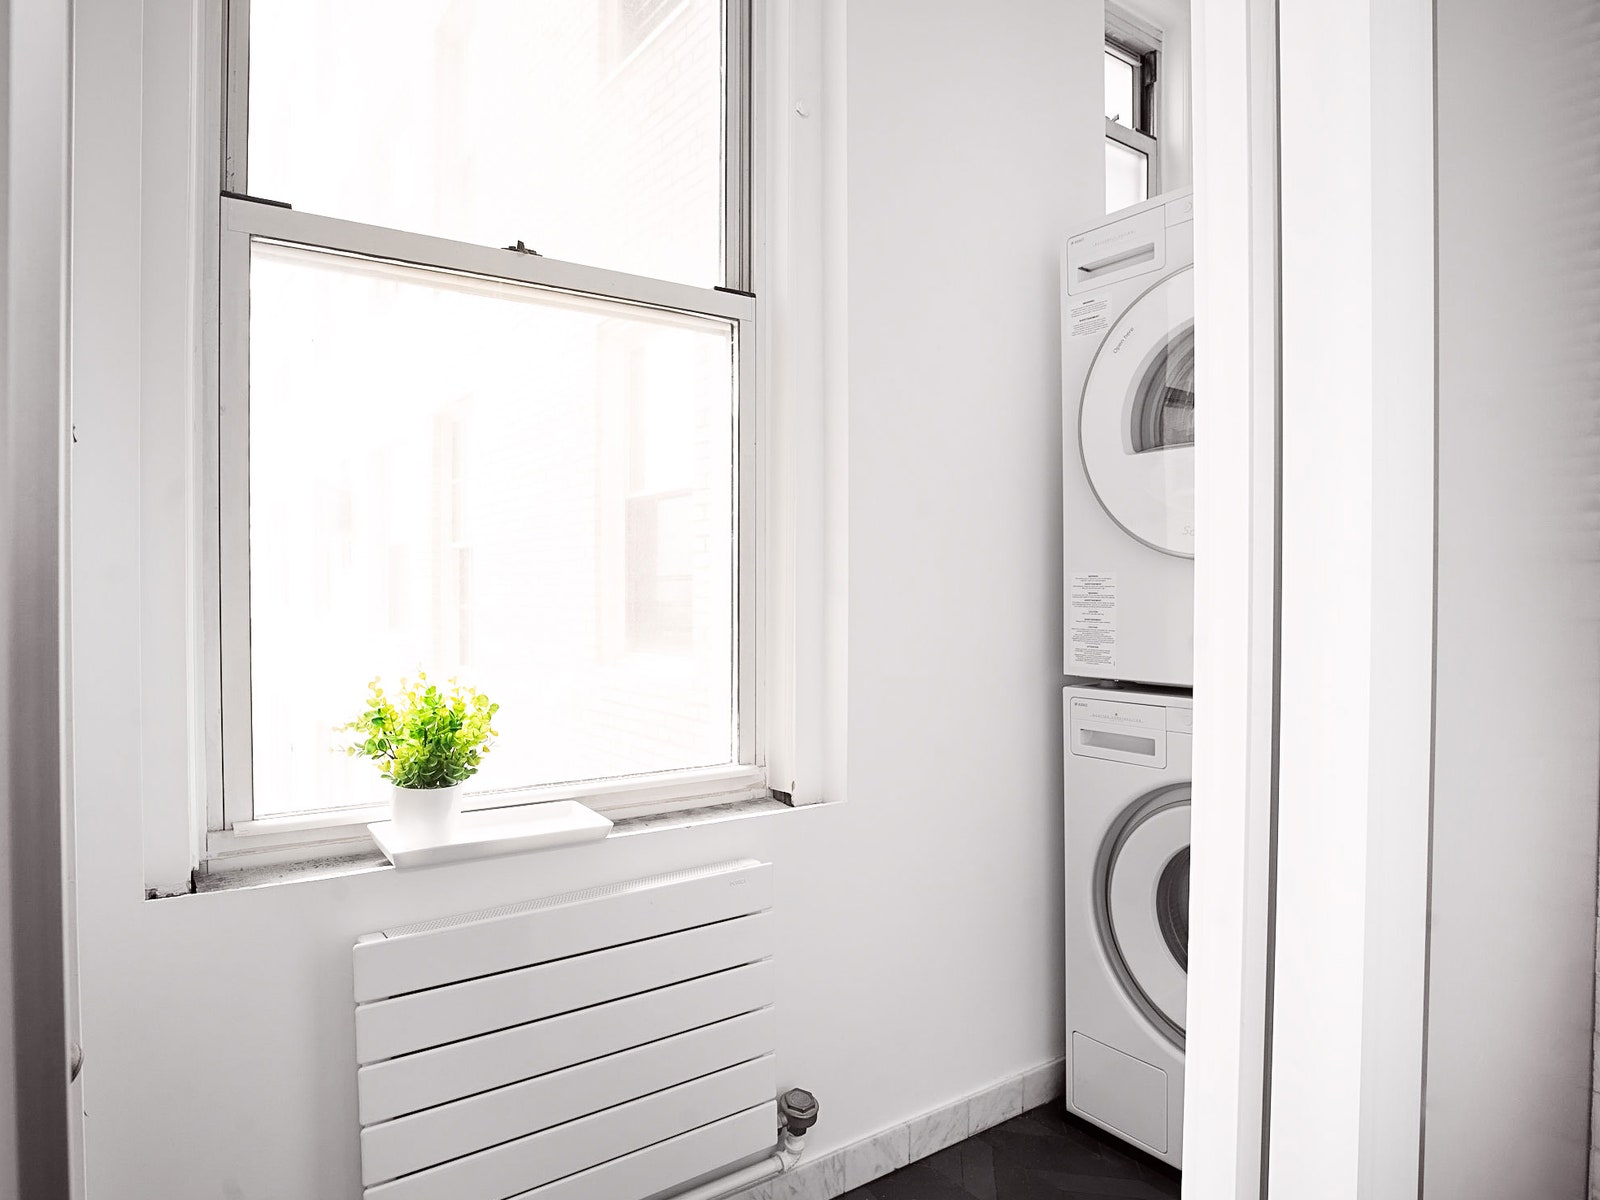 Learn how to clean washing a machine so it looks as fresh on the inside as it does on the outside.